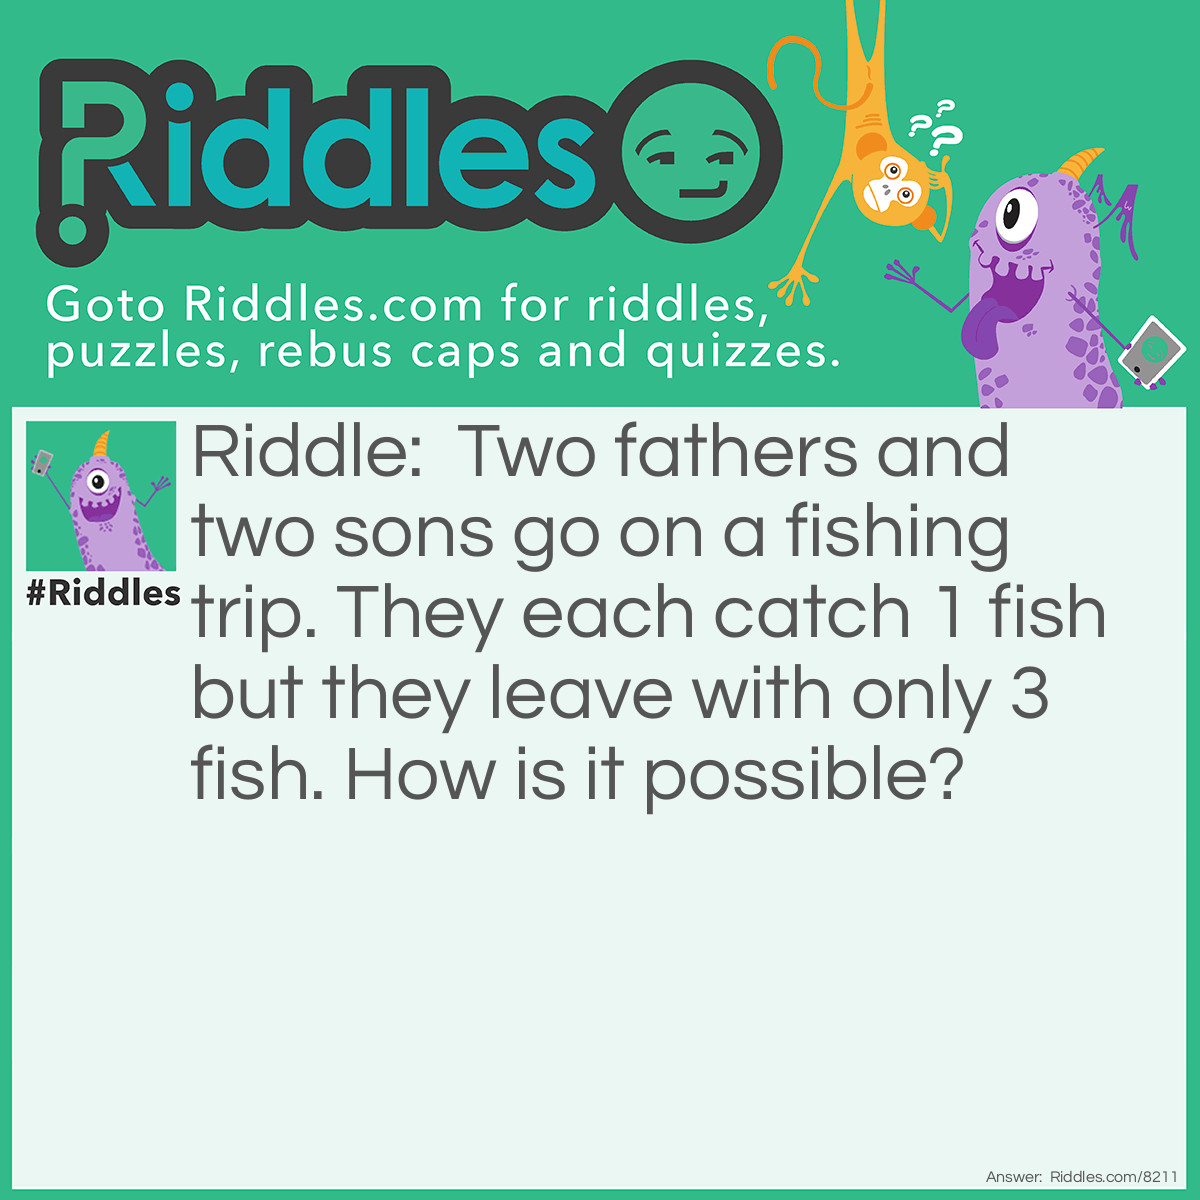 Riddle: Two fathers and two sons go on a fishing trip. They each catch 1 fish but they leave with only 3 fish. How is it possible? Answer: A grandfather, a father, and a son go on the trip. The father is the grandfather's son and the father of the son. There are only three people and since they each caught one fish, they have three fish in total.